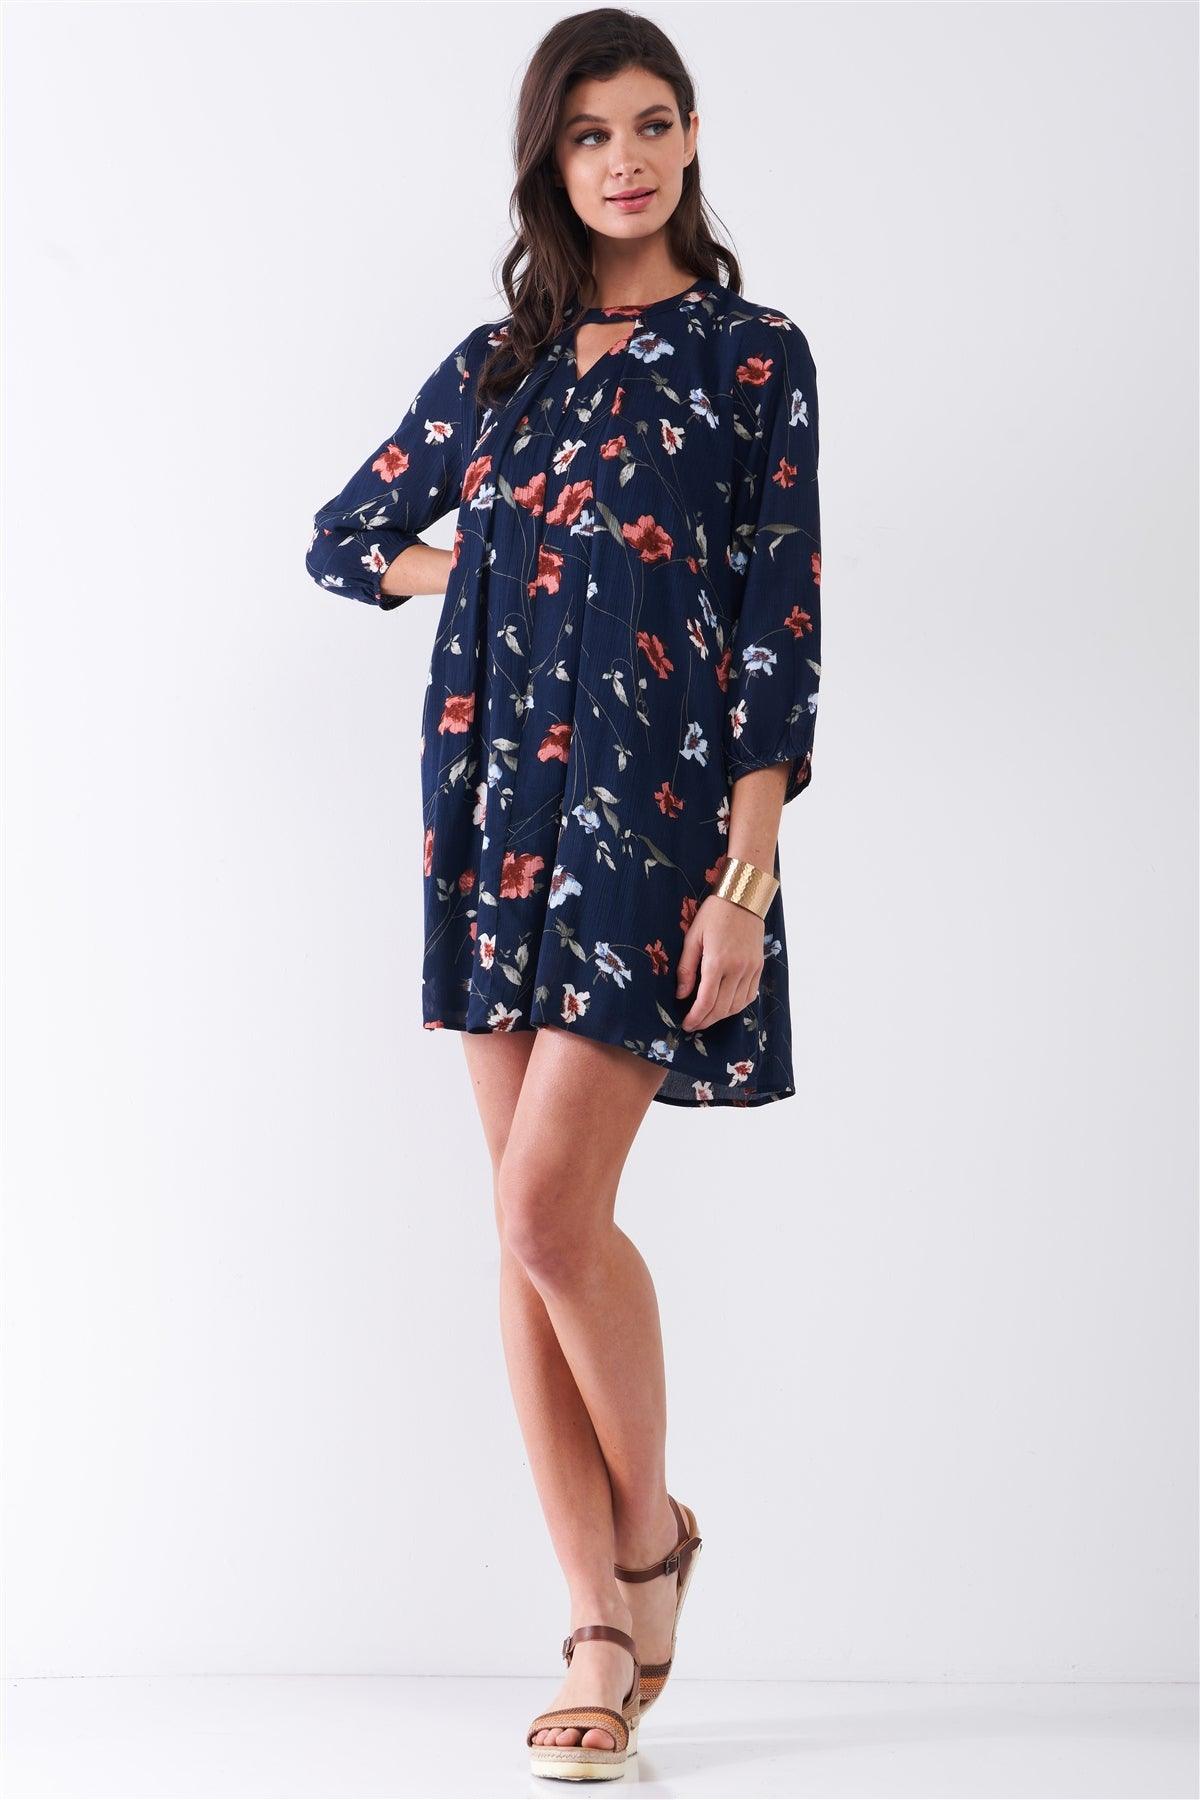 Navy Multicolor Floral Print Long Sleeve Pleated Front V-Neck Loose Mini Dress